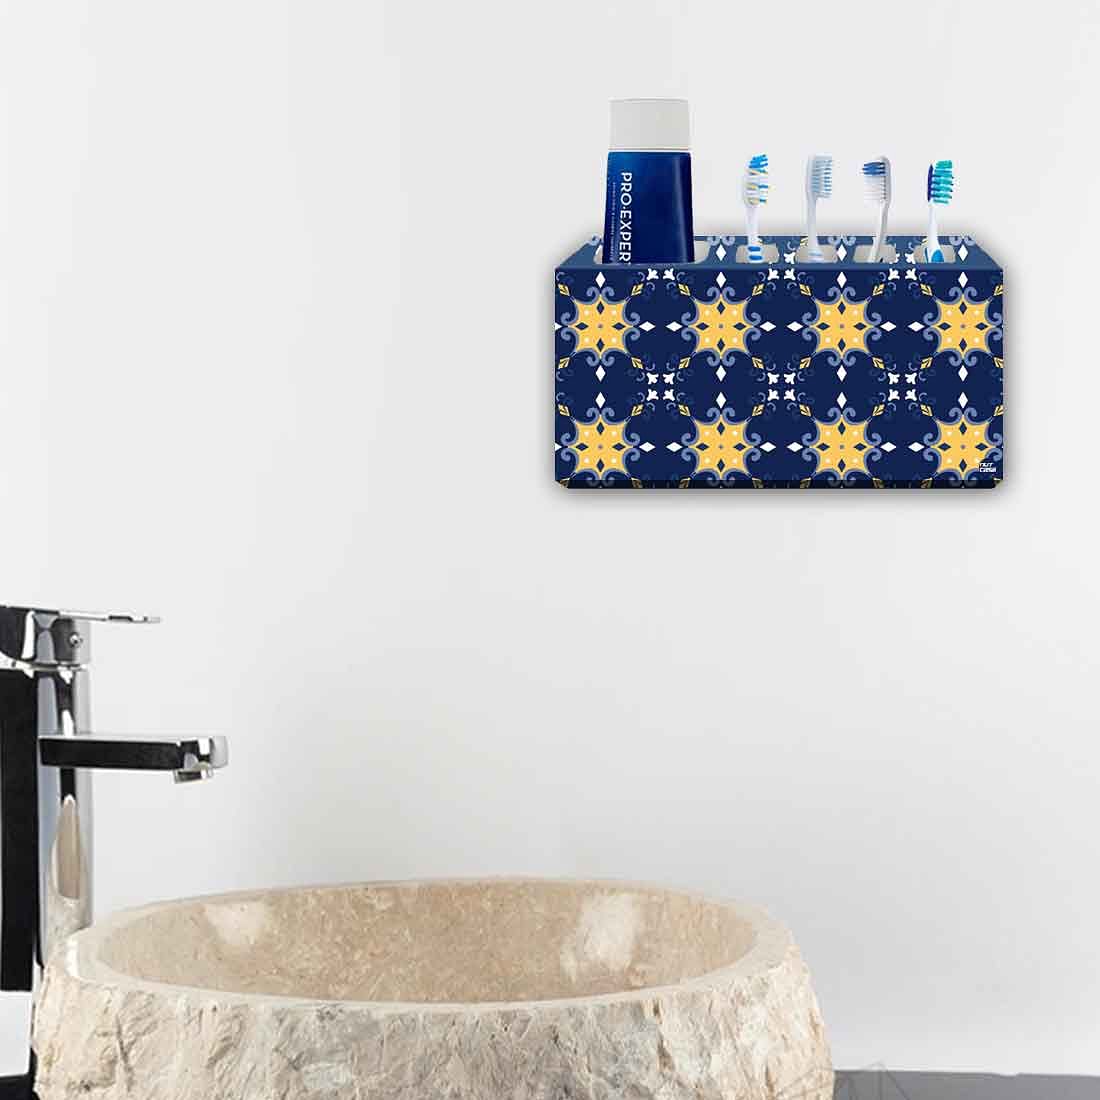 Toothbrush Holder Wall Mounted - Blue Yellow Design Nutcase